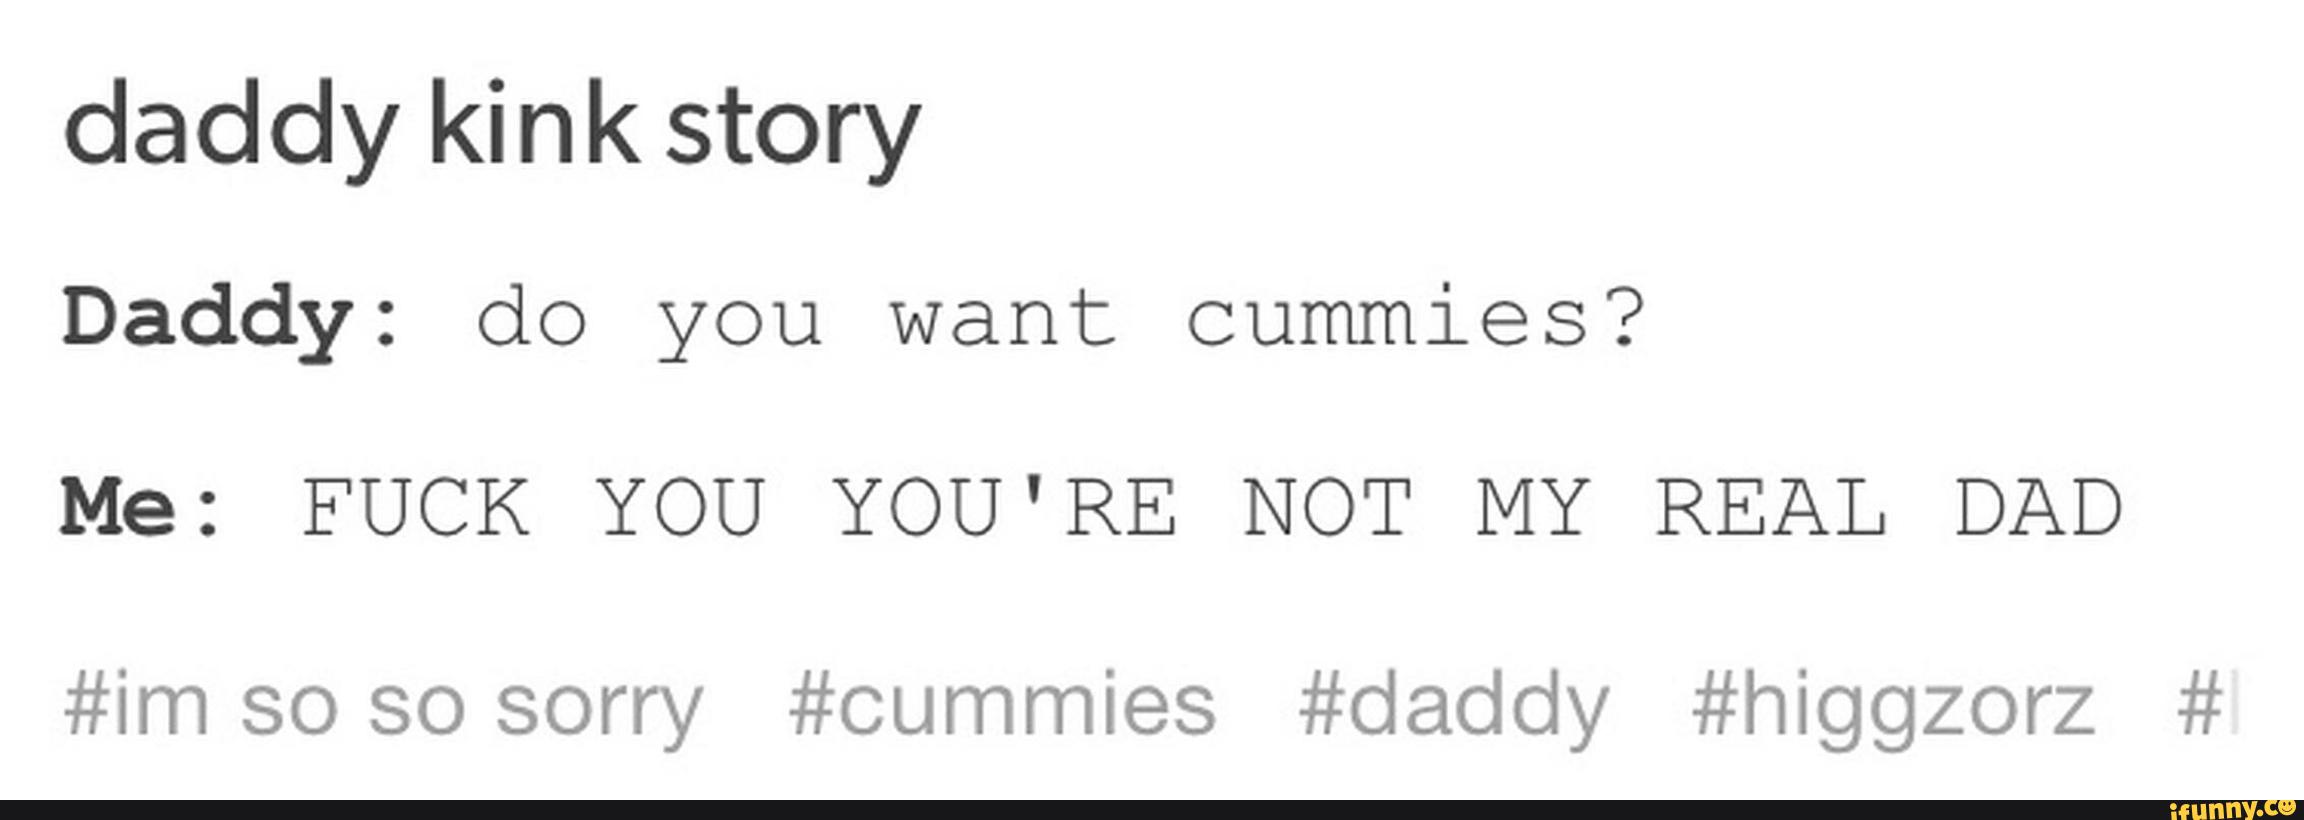 Me: FUCK YOU YOU'RE NOT MY REAL DAD #im so so sorry #oummies #daddy #h...